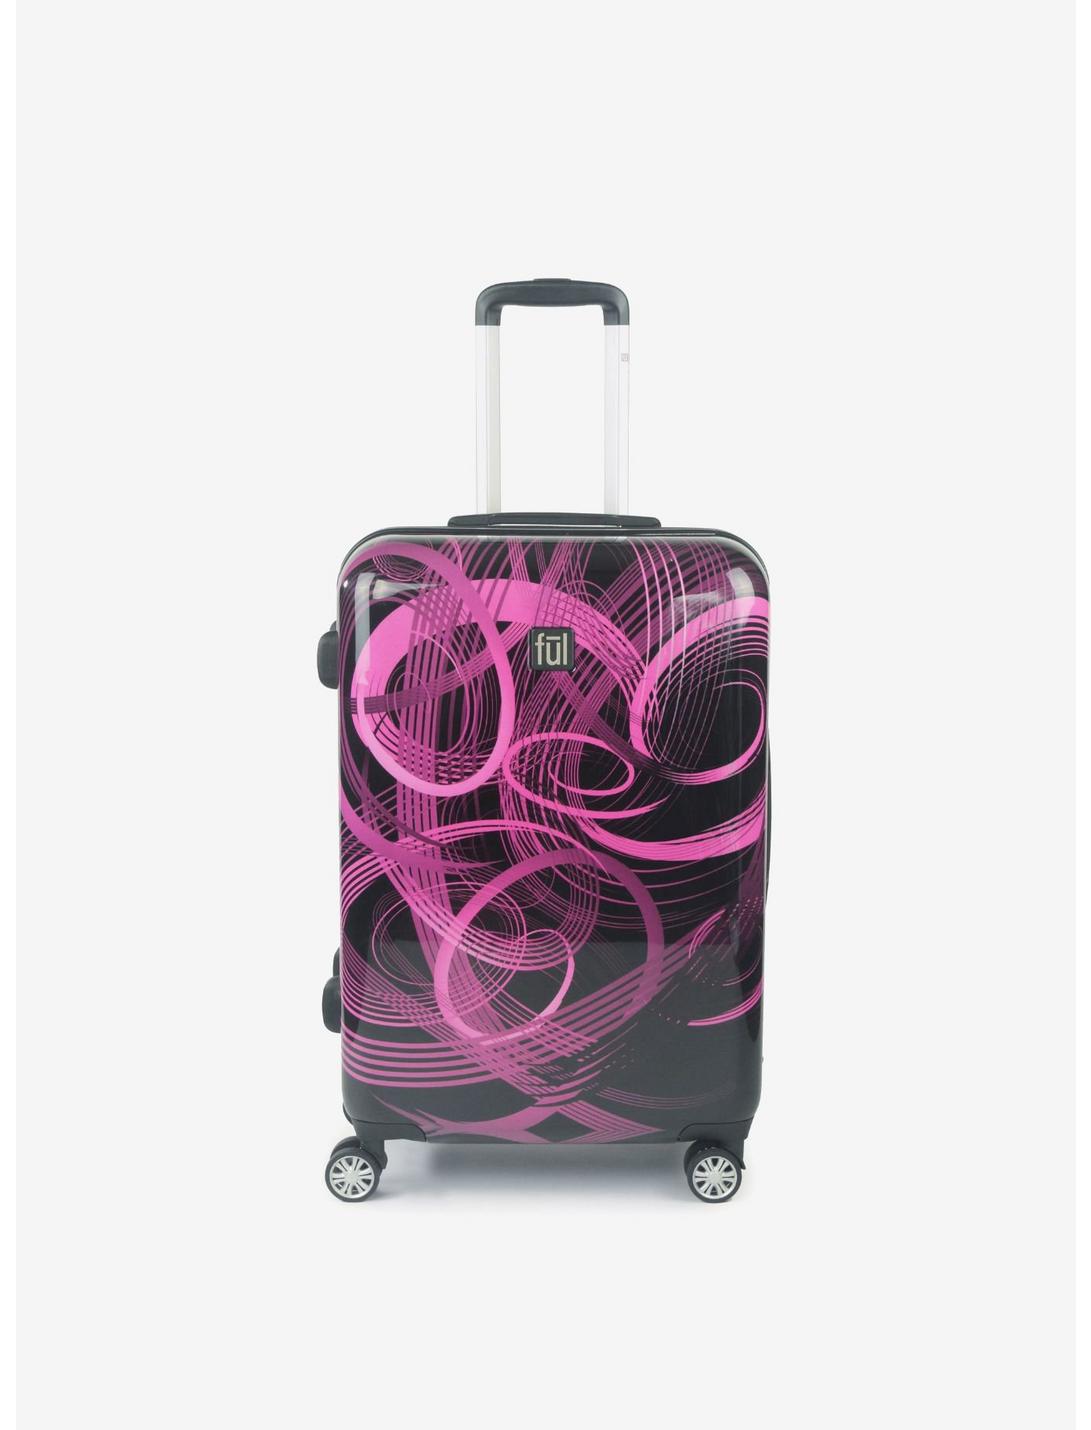 FUL Atomic 24 Inch Expandable Spinner Rolling Luggage Suitcase, , hi-res